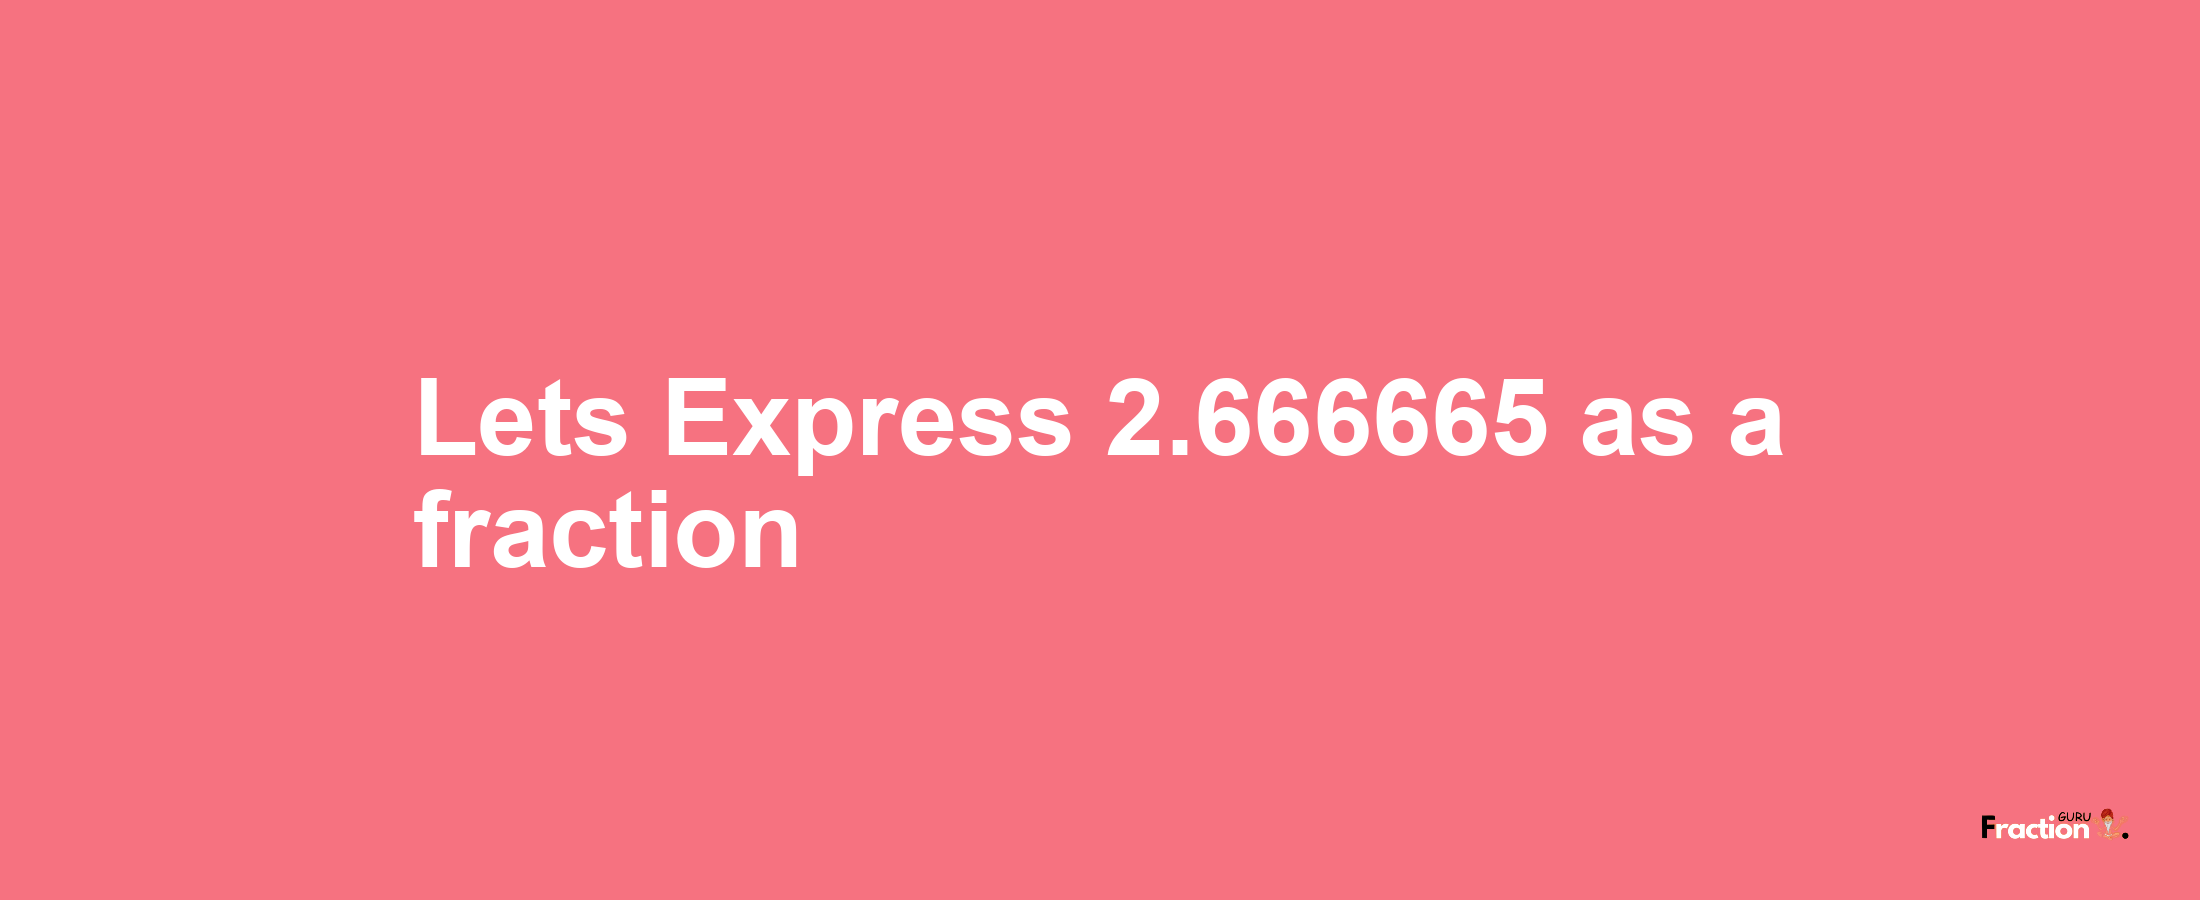 Lets Express 2.666665 as afraction